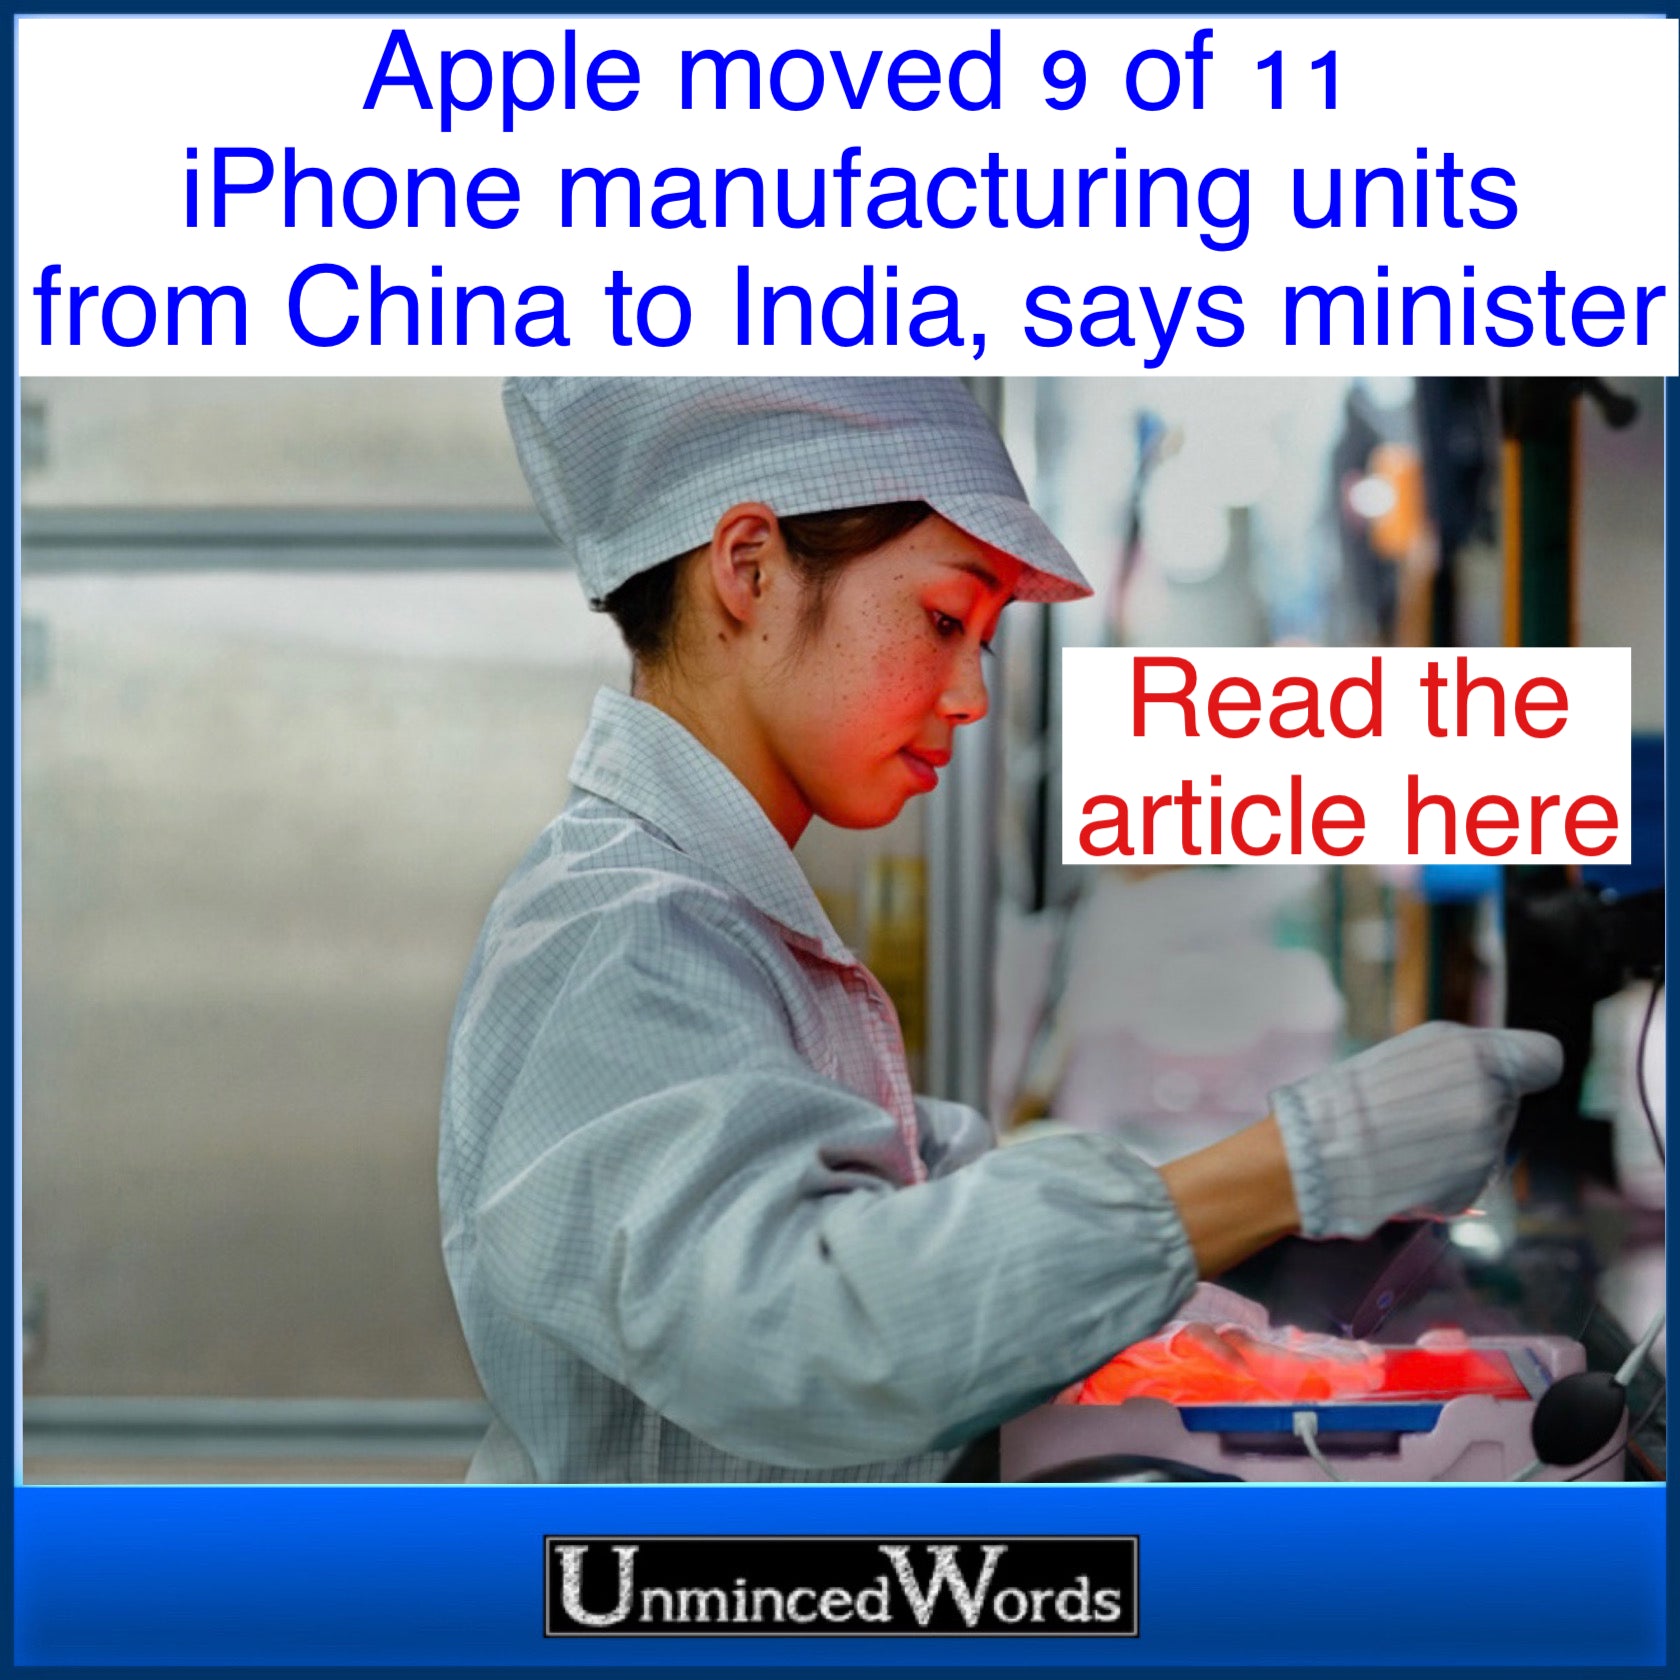 Apple moved 9 of 11 iPhone manufacturing units from China to India, says minister